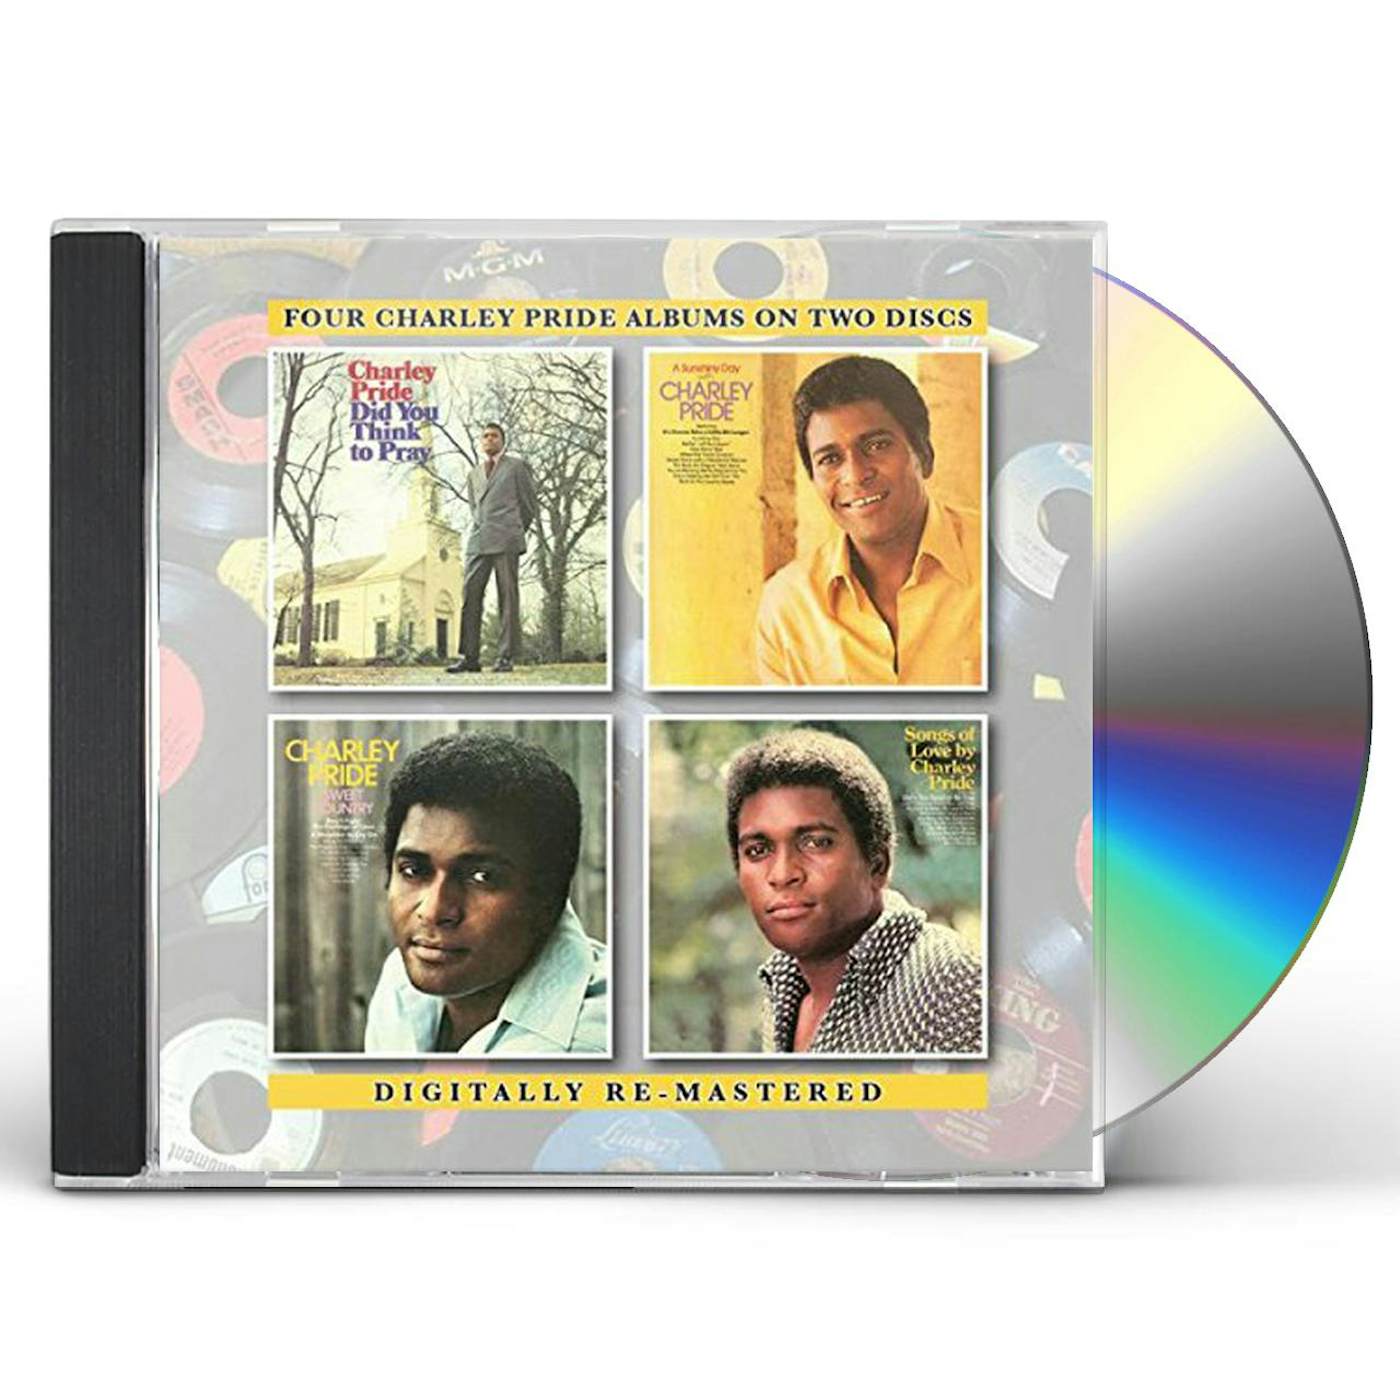 Charley Pride DID YOU THINK TO PRAY /SUNSHINY DAY WITH CHARLEY CD